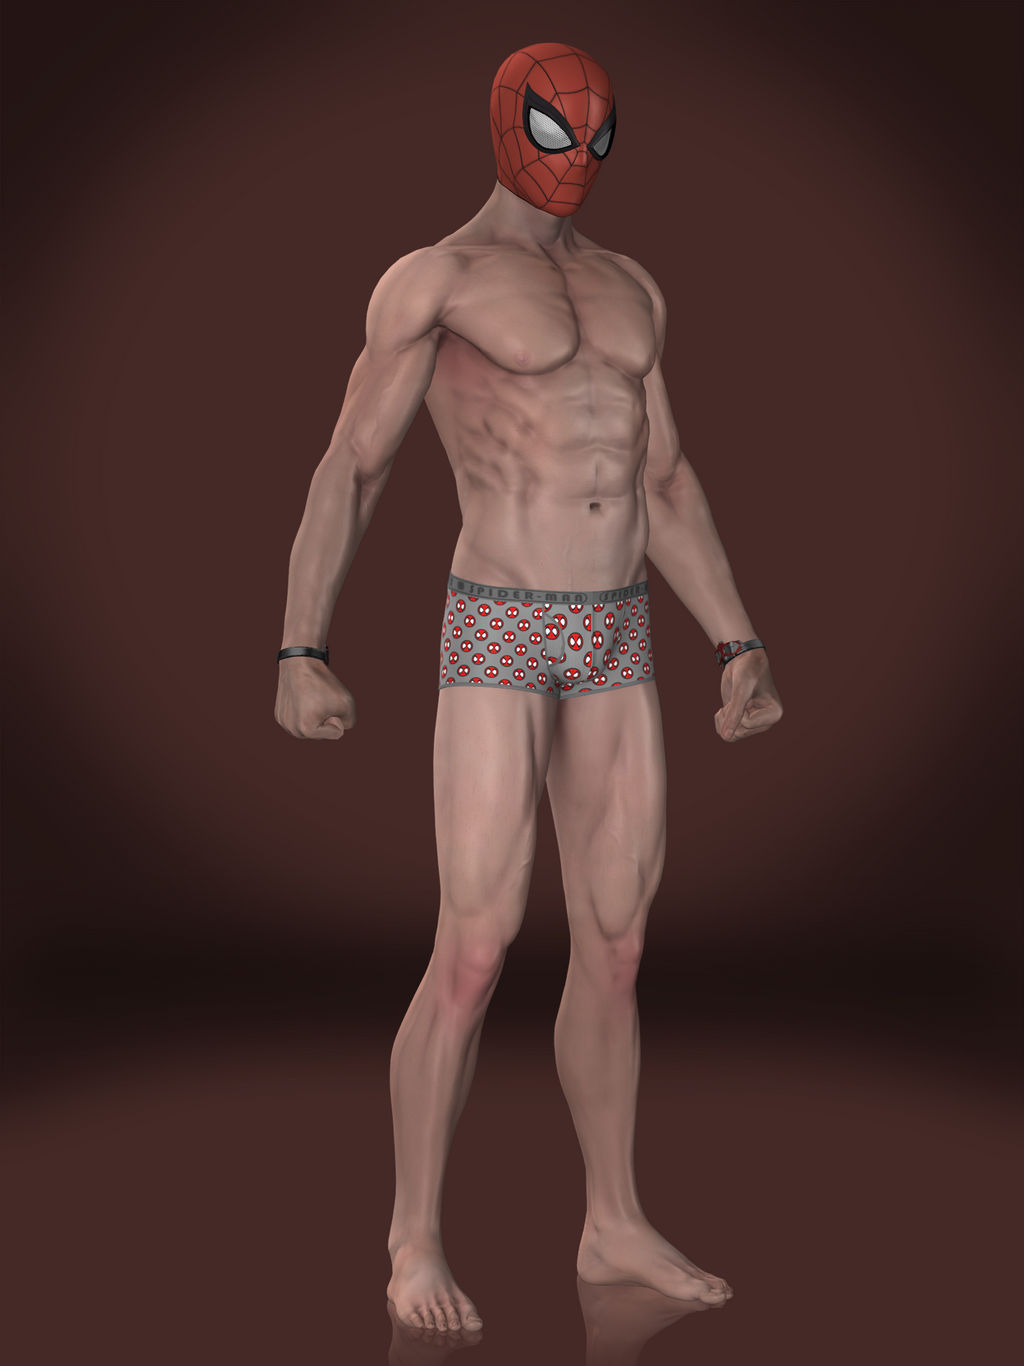 Spiderman In His Undies Chilling On The Subway by jamieearlsblues on  DeviantArt